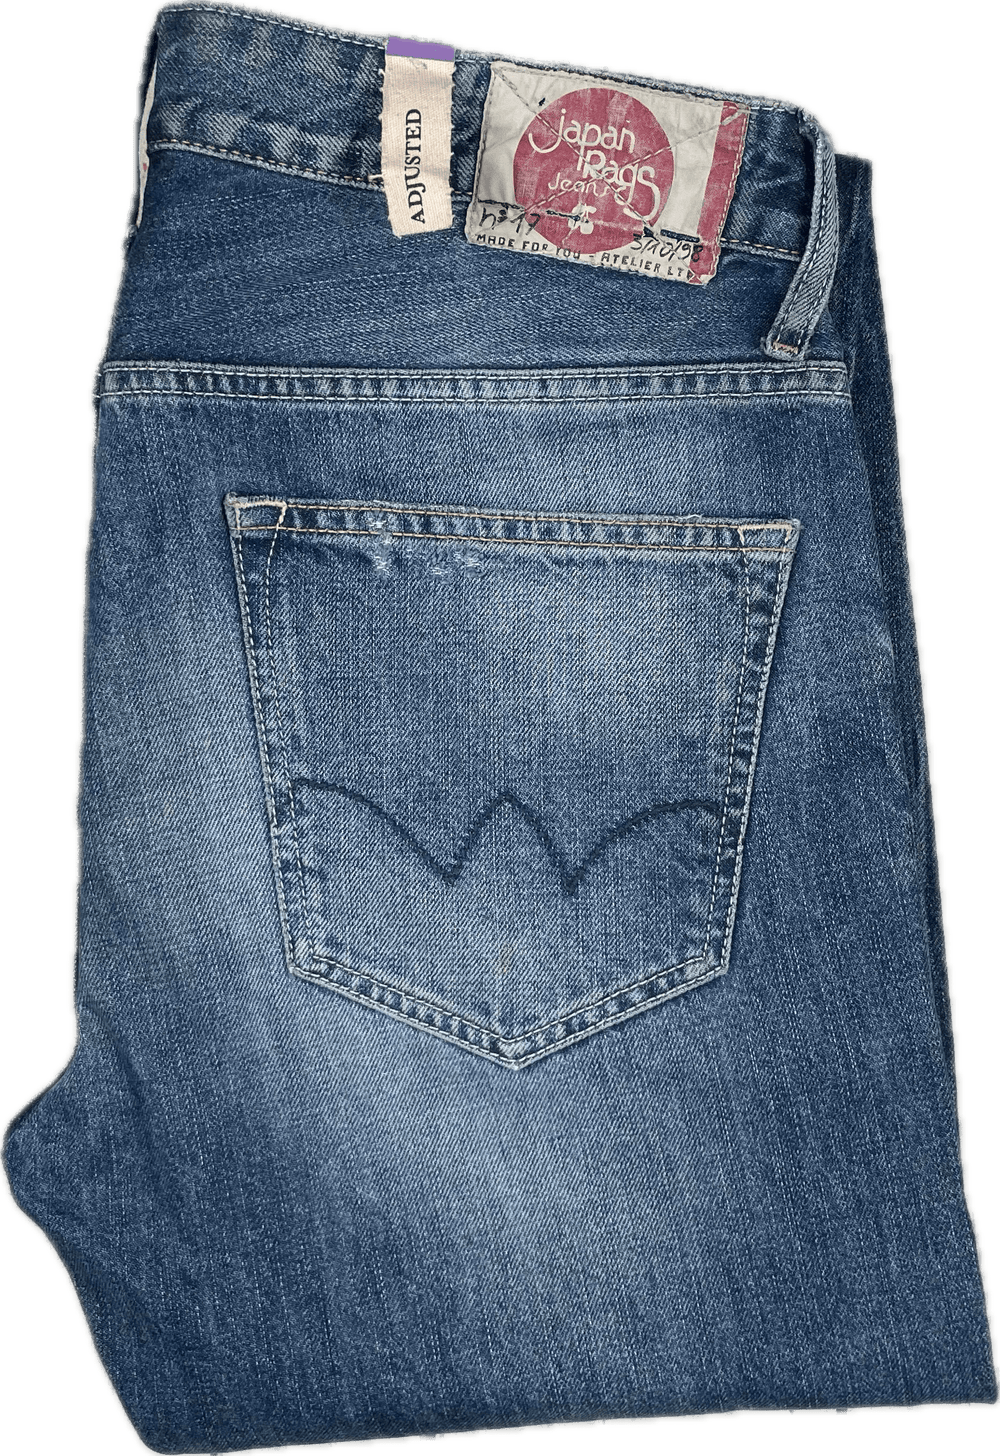 NEW- Japan Rags- H17 -611 Basic Jeans Wash WT82 Mens Jeans -Size 33 - Jean Pool